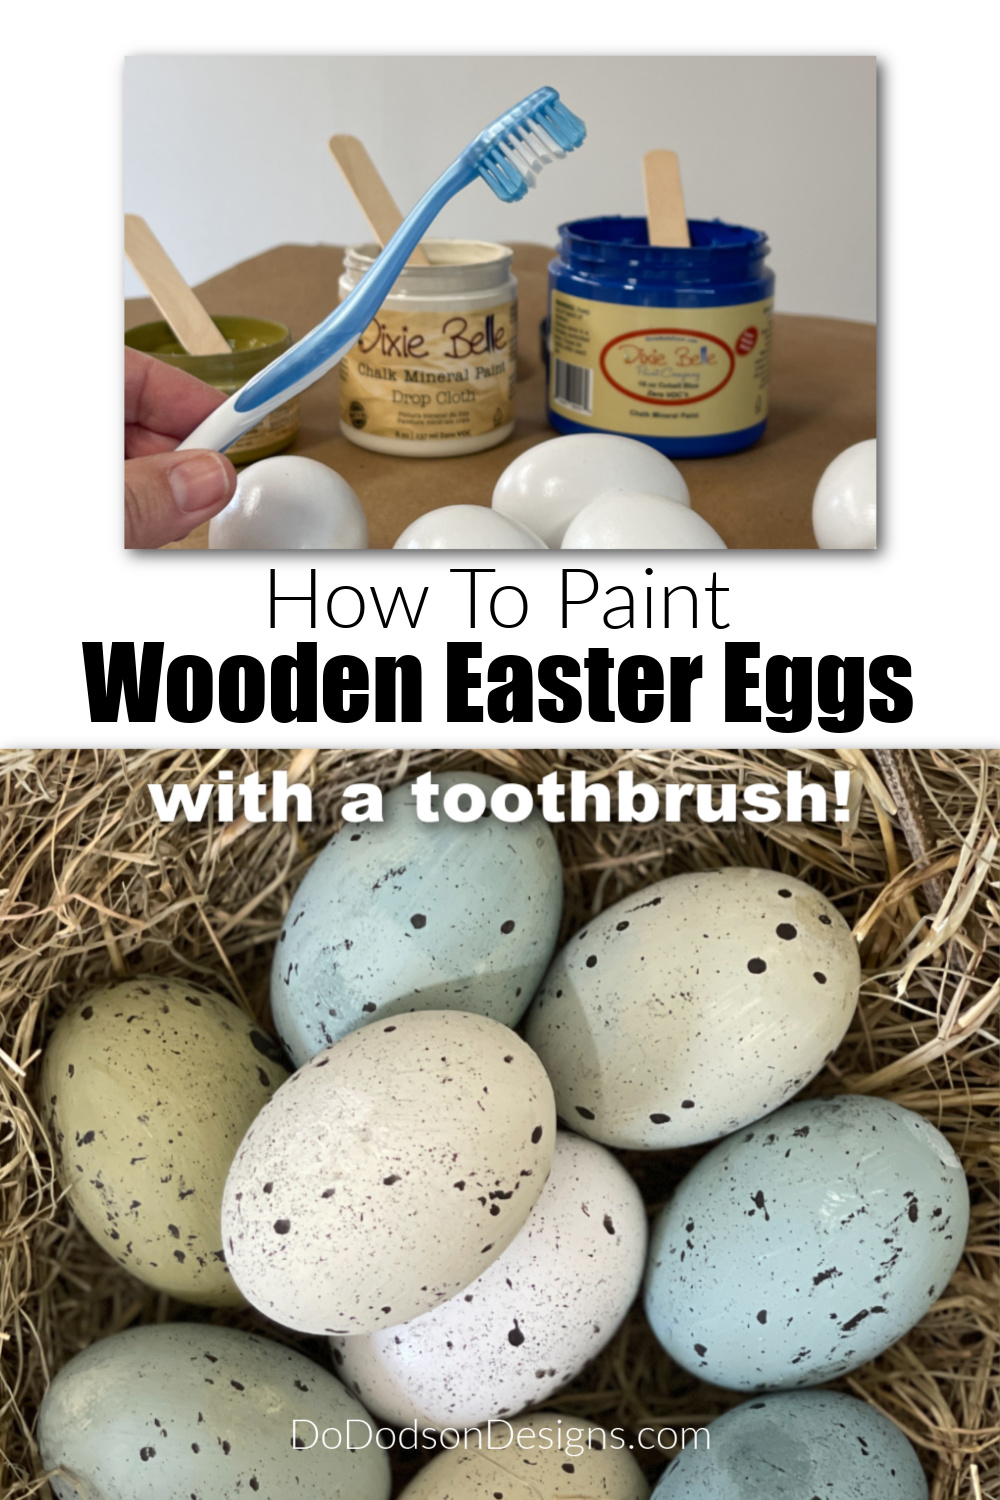 How To Paint Wooden Easter Eggs with a Toothbrush